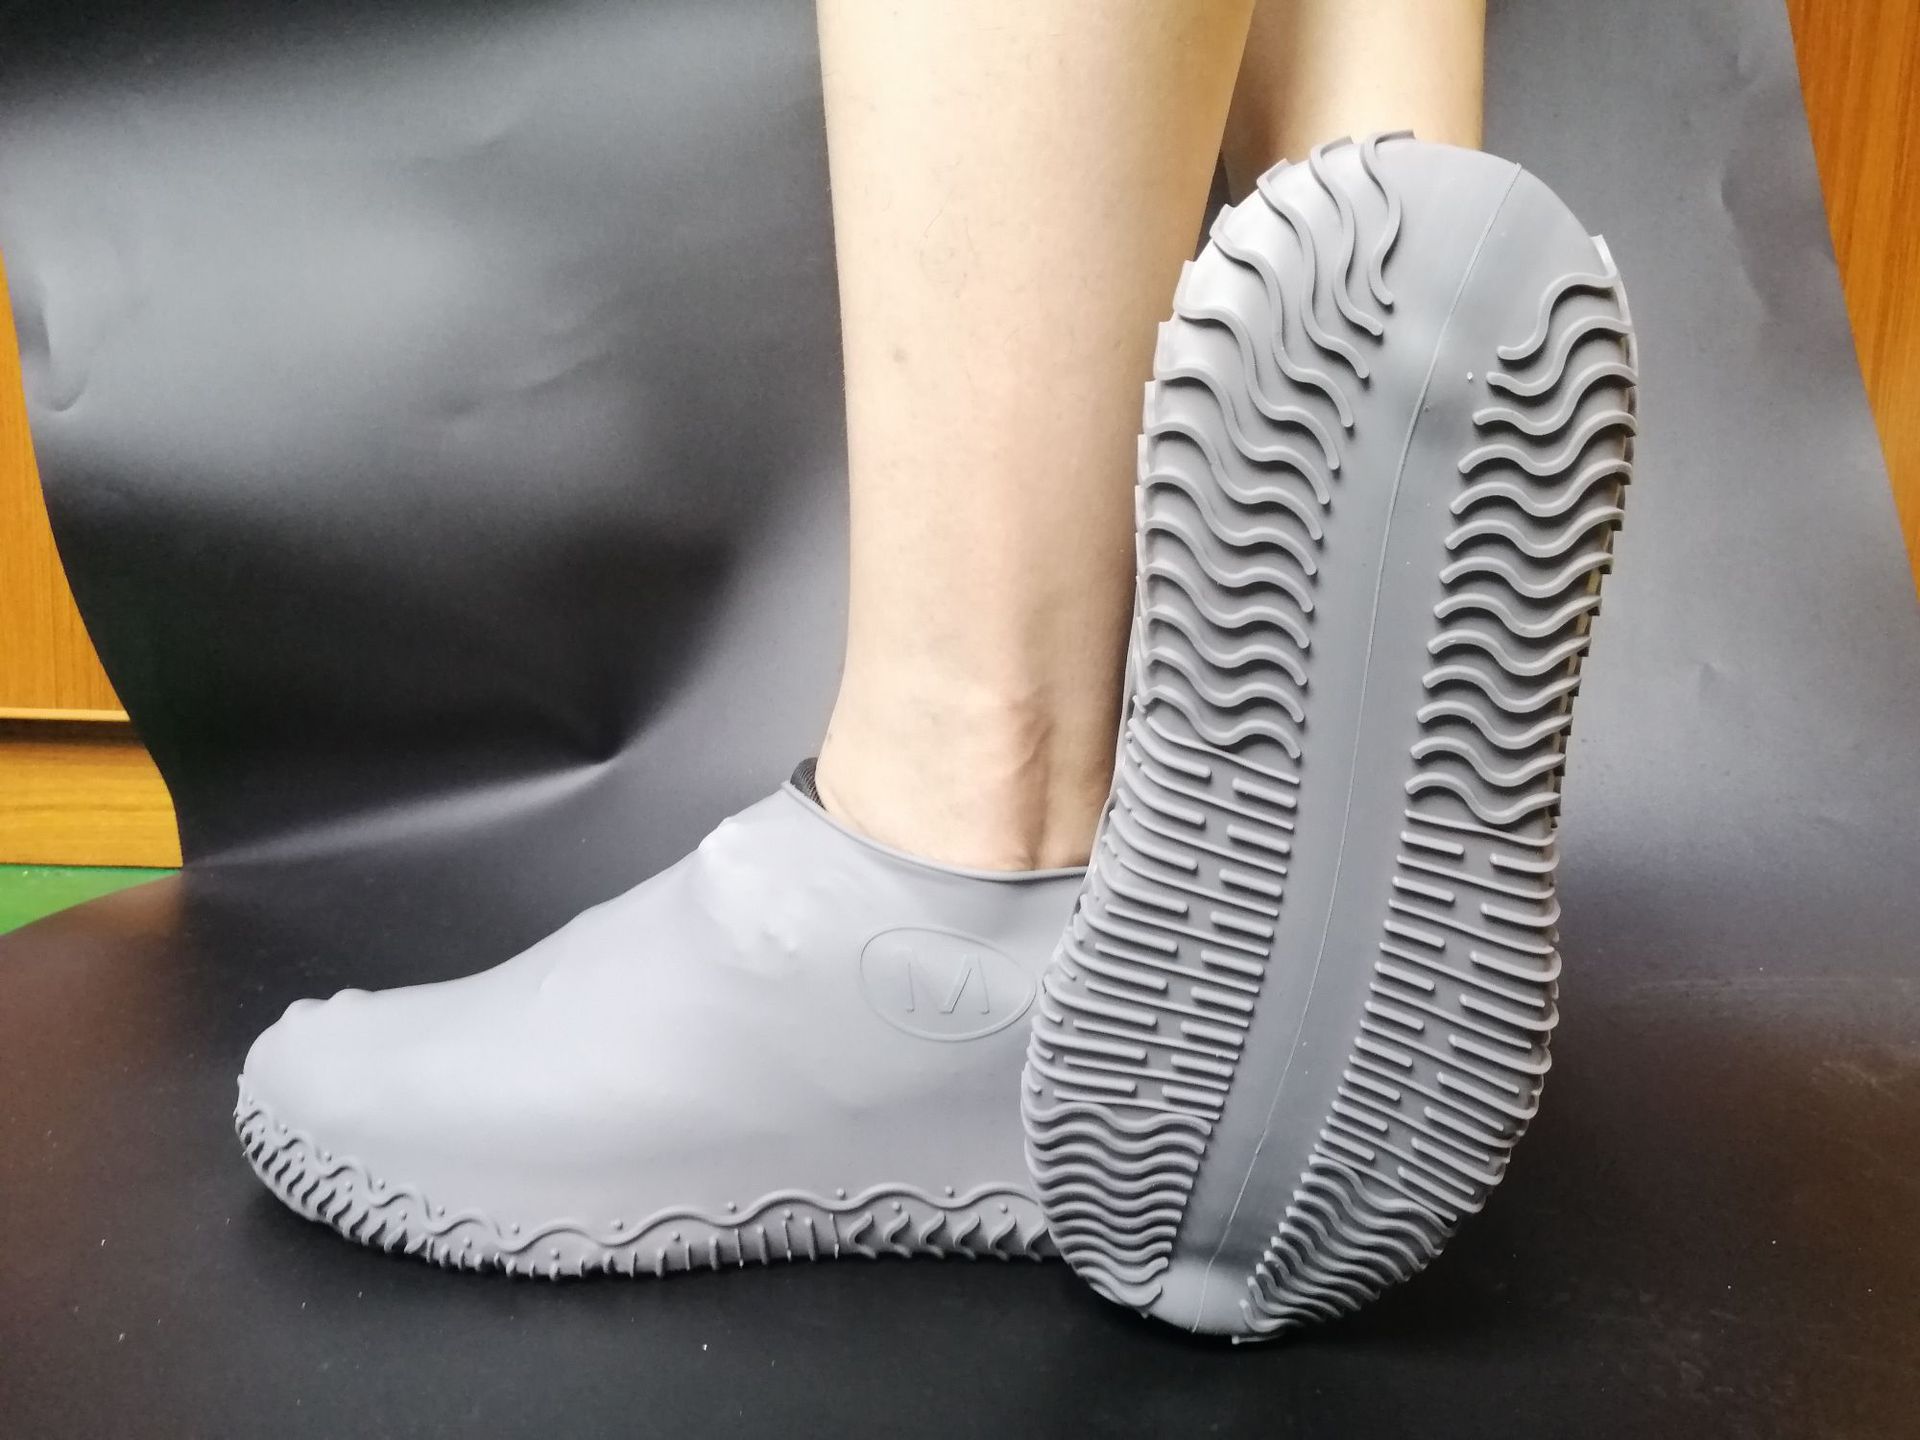 Shop shoe cover with free shipping - Waterproof Silicone Shoe Covers Long Reusable Non-Slip Wear-Resistant Rain Shoe Protector Anti-Slip Boot For Outdoor Rainy Day. Free shipping only at Tophatter